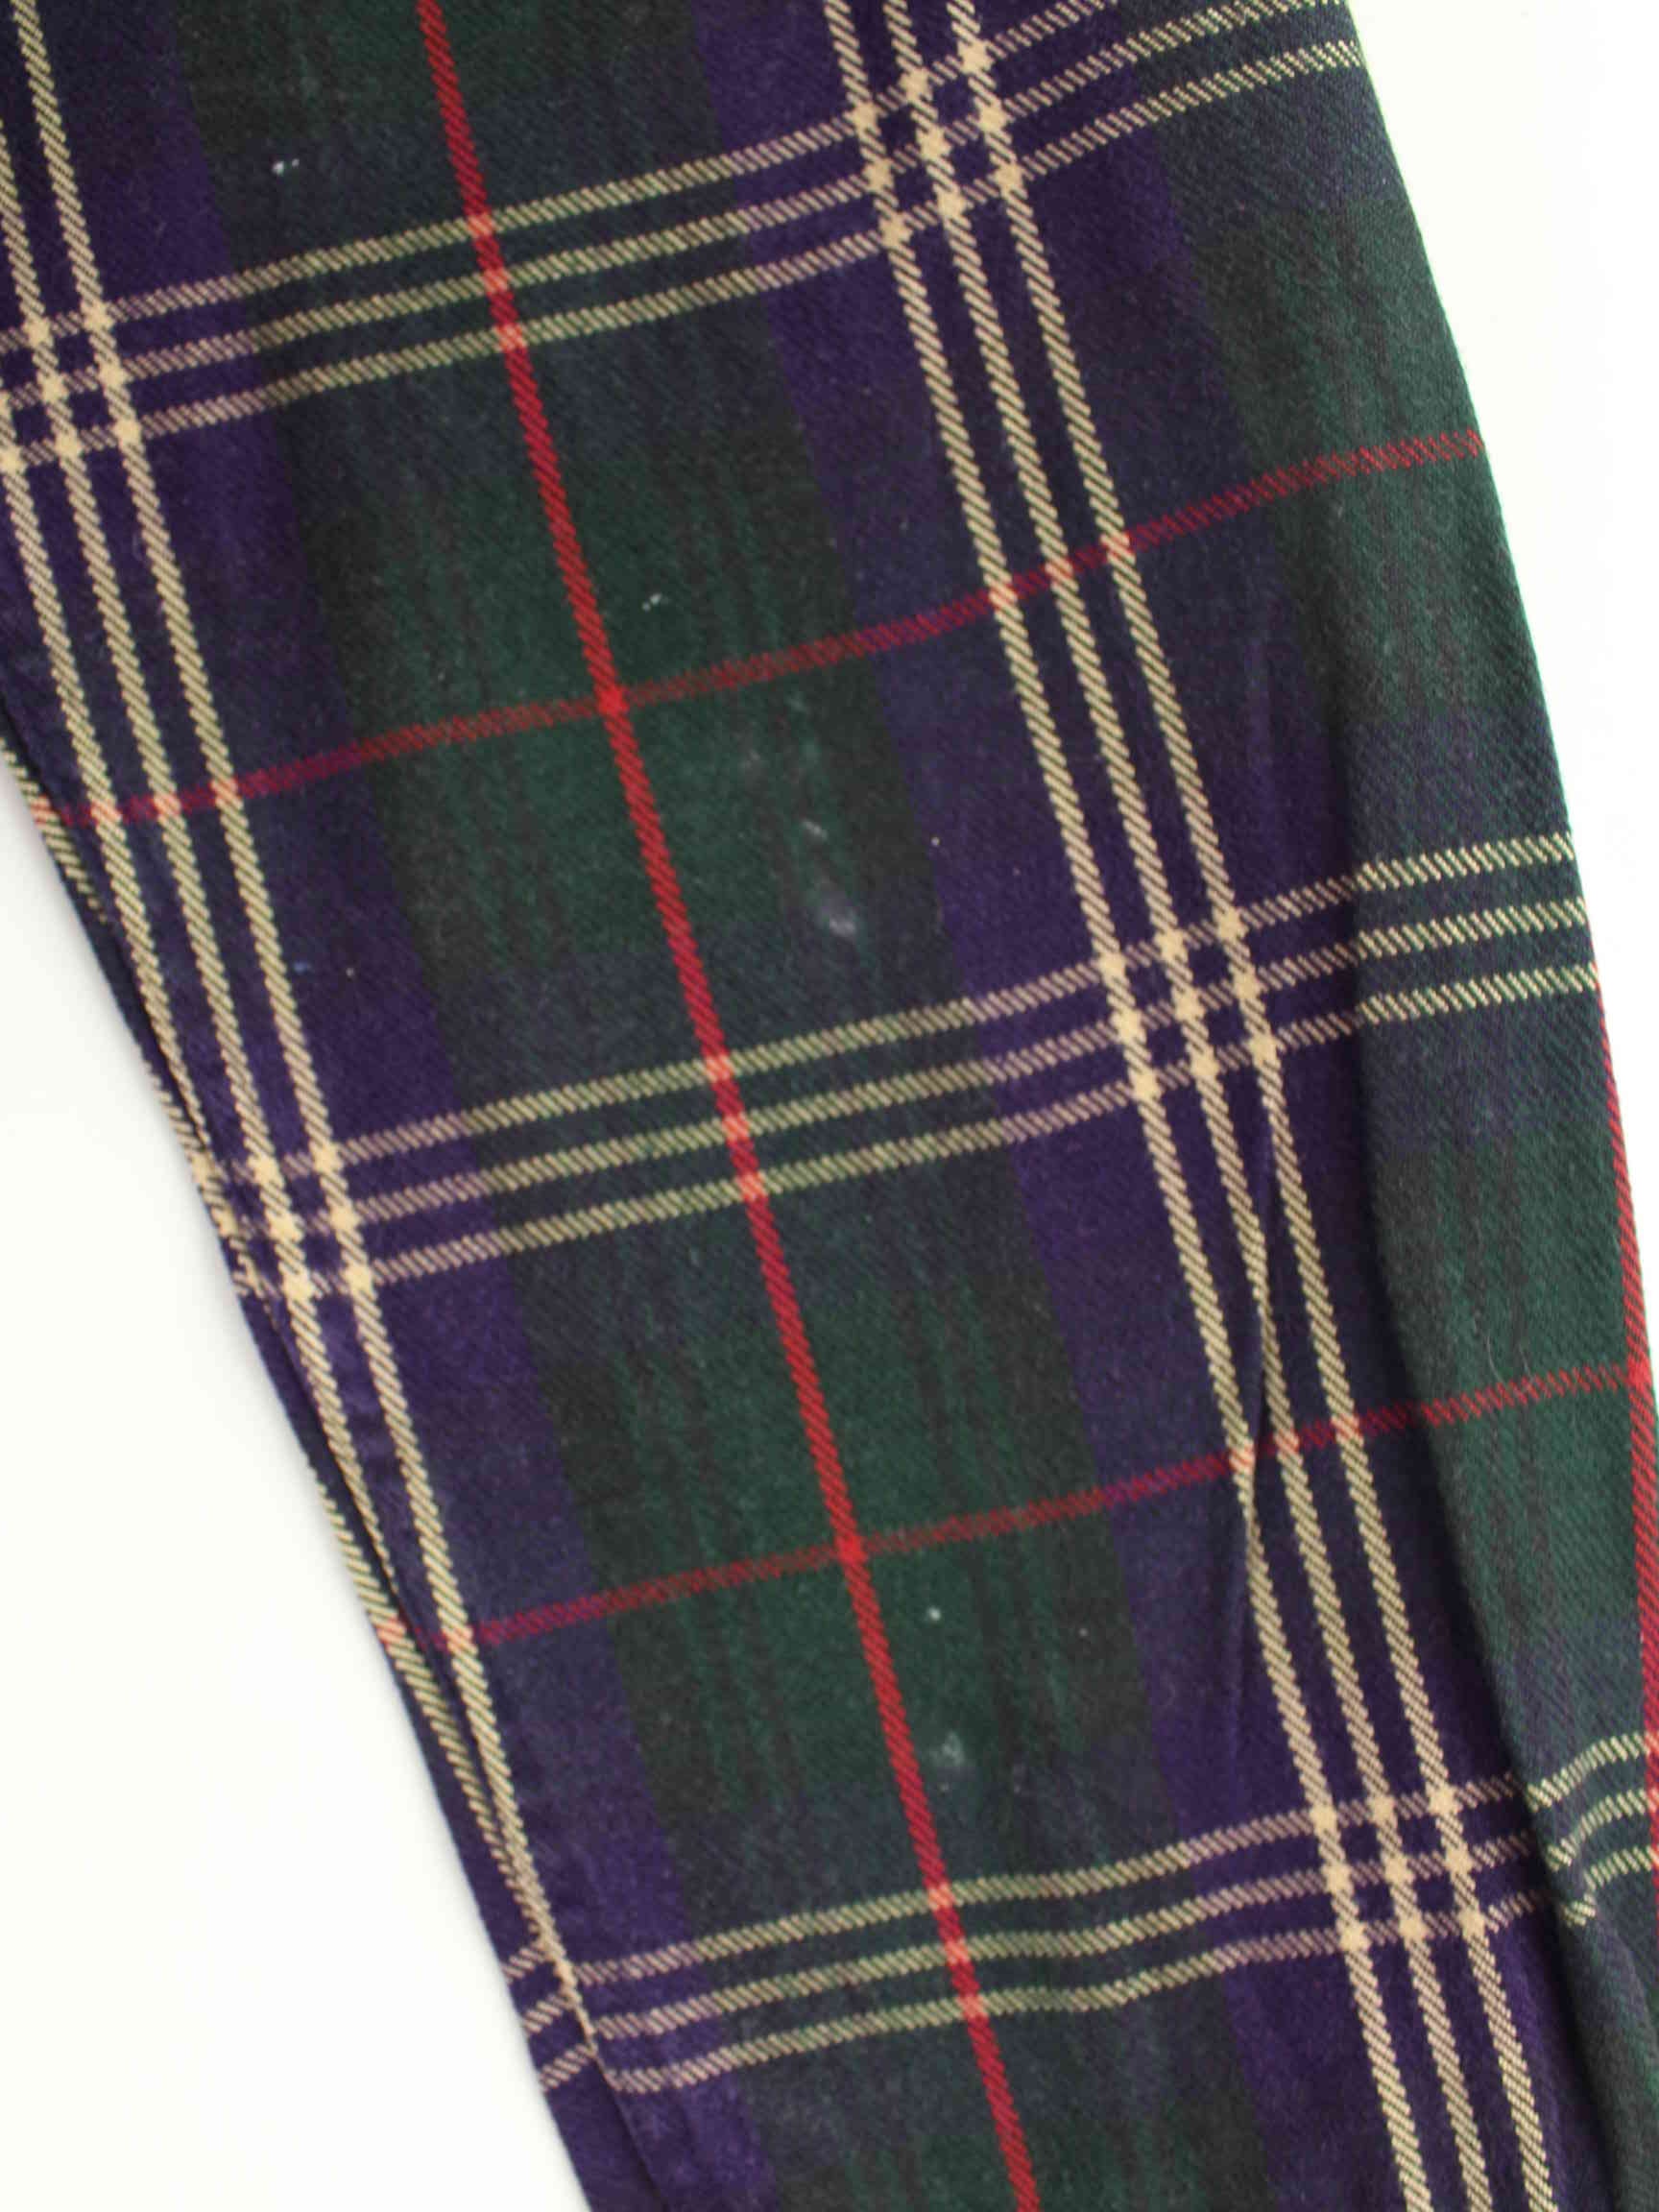 Barbour Flanell Hemd Mehrfarbig XL (detail image 6)